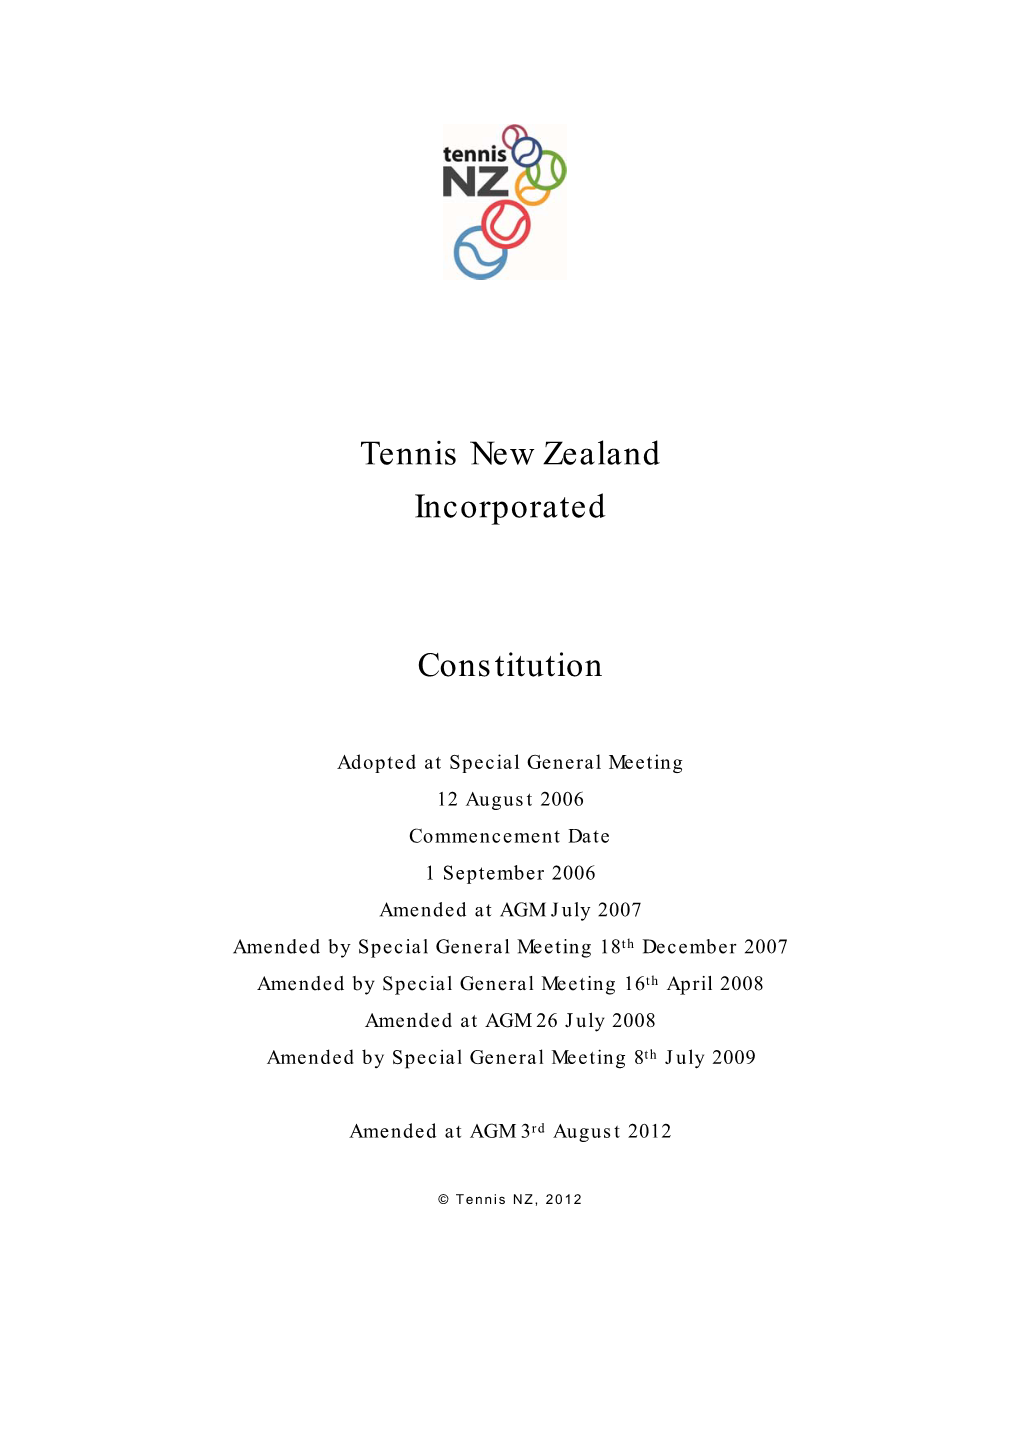 Tennis New Zealand Incorporated Constitution